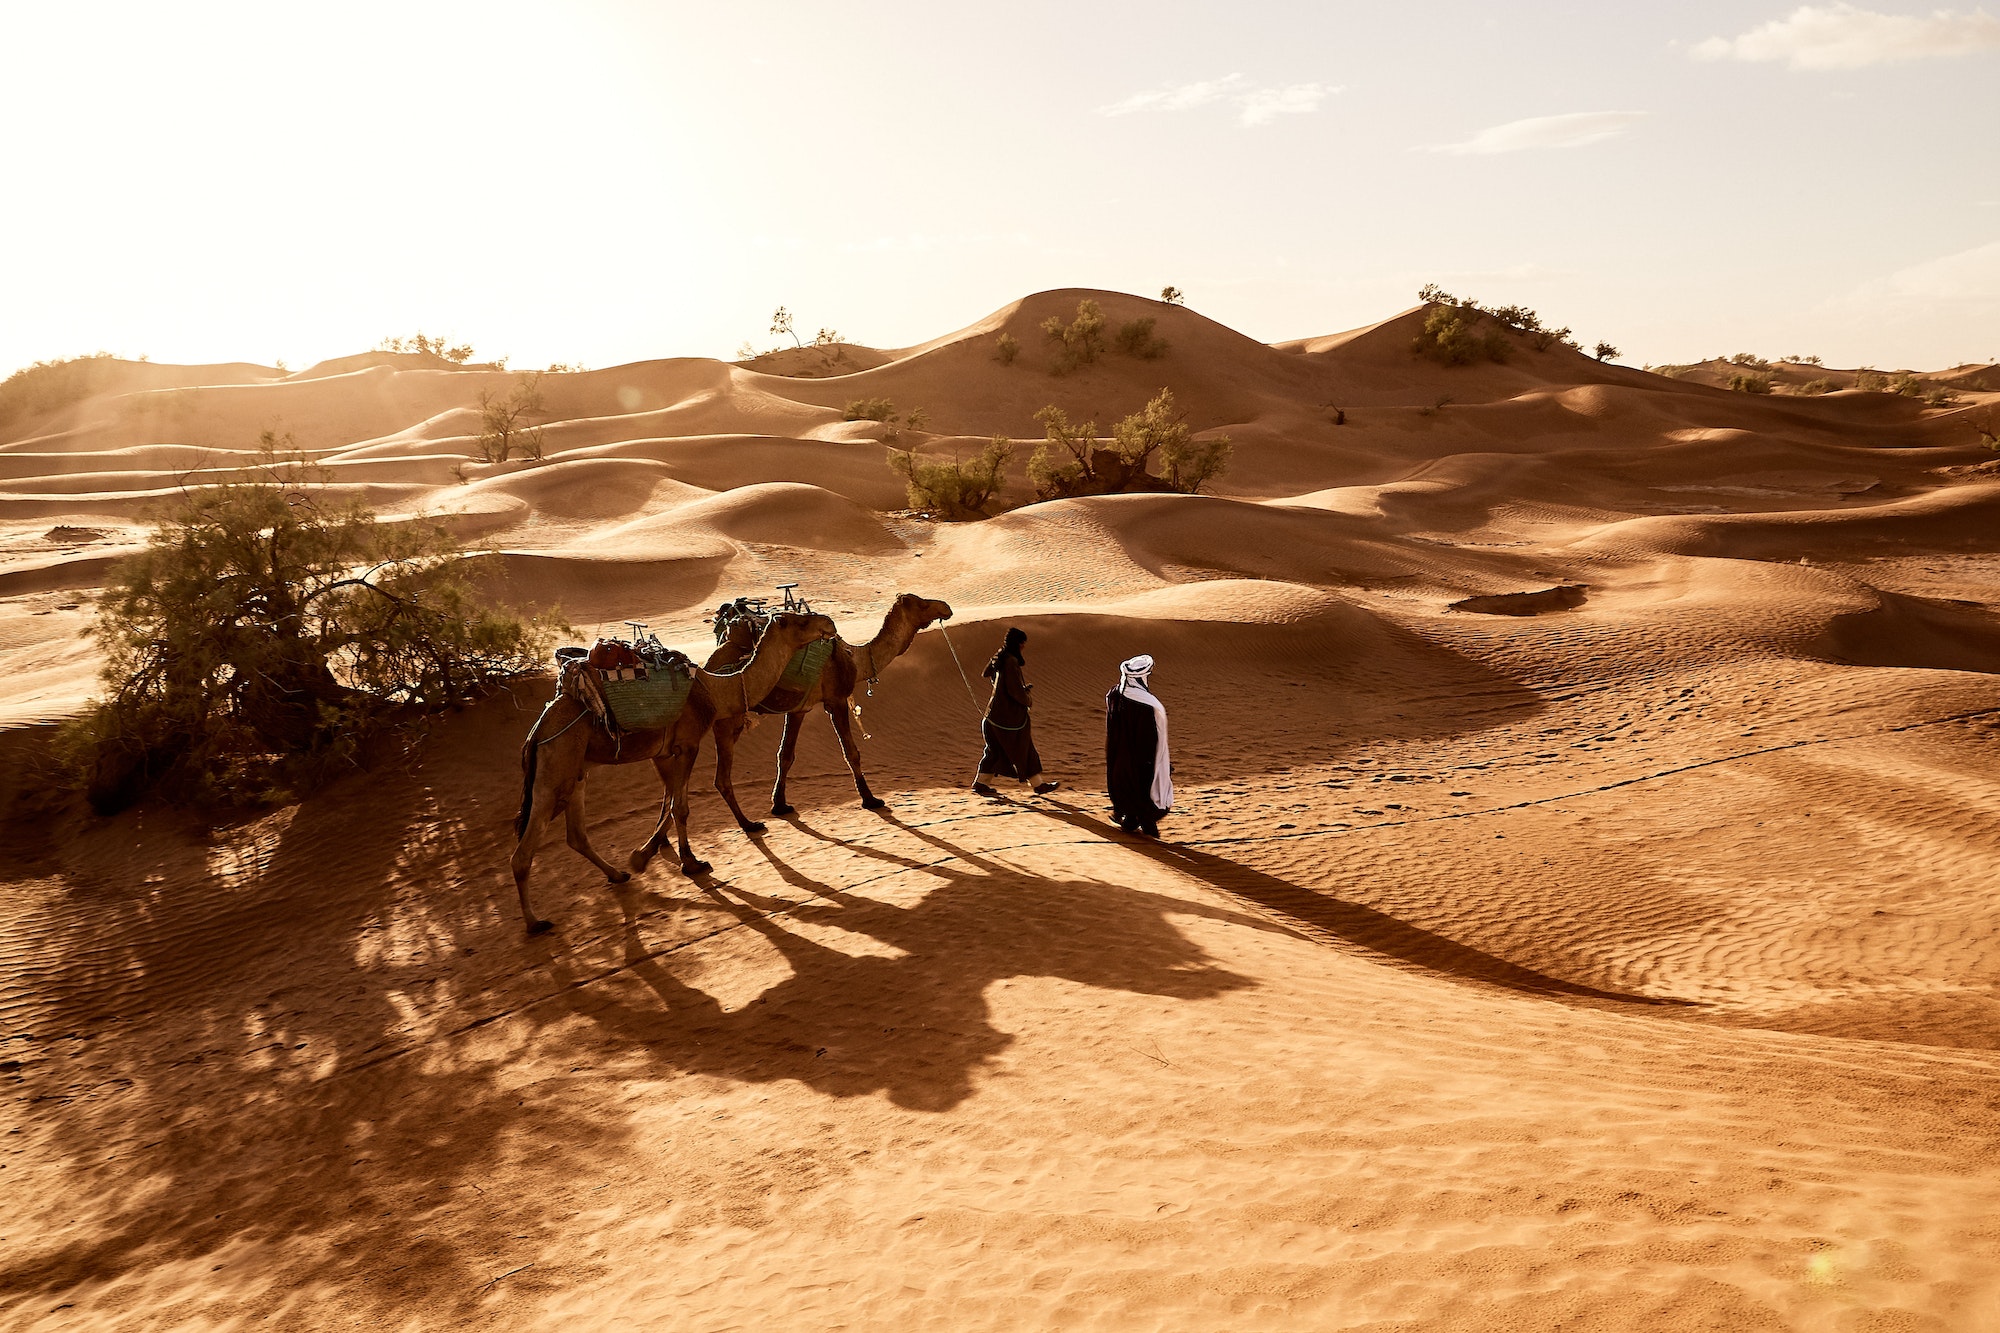 Beautiful shot of people walking with their camels in the desert of Erg Lihoudi in Morocco